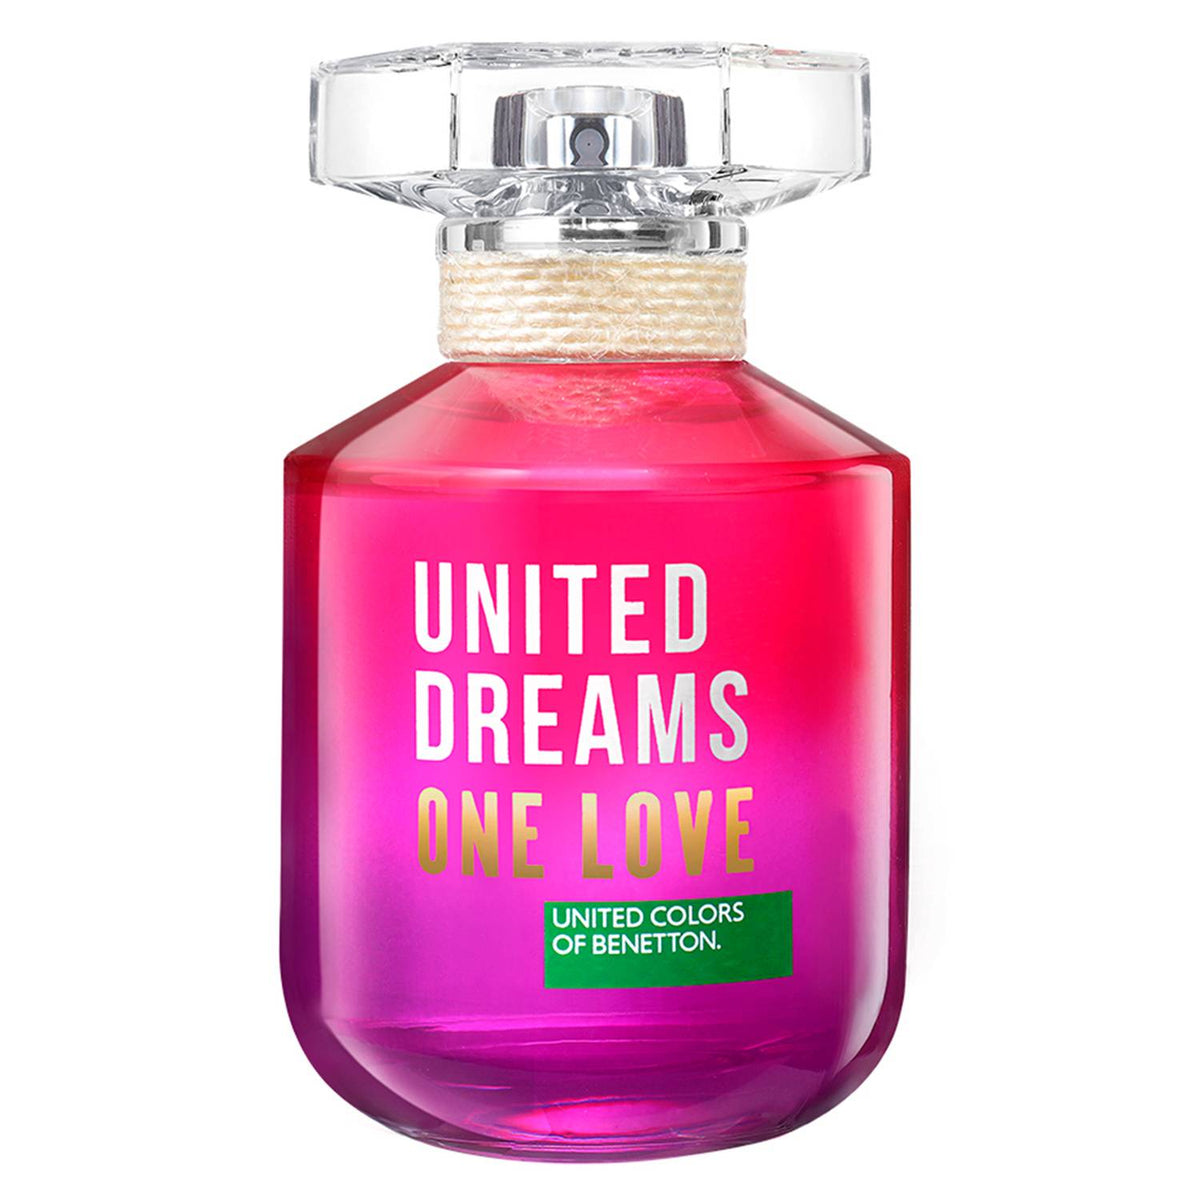 United Dreams One Love Benetton Tester Edt 80ML Mujer